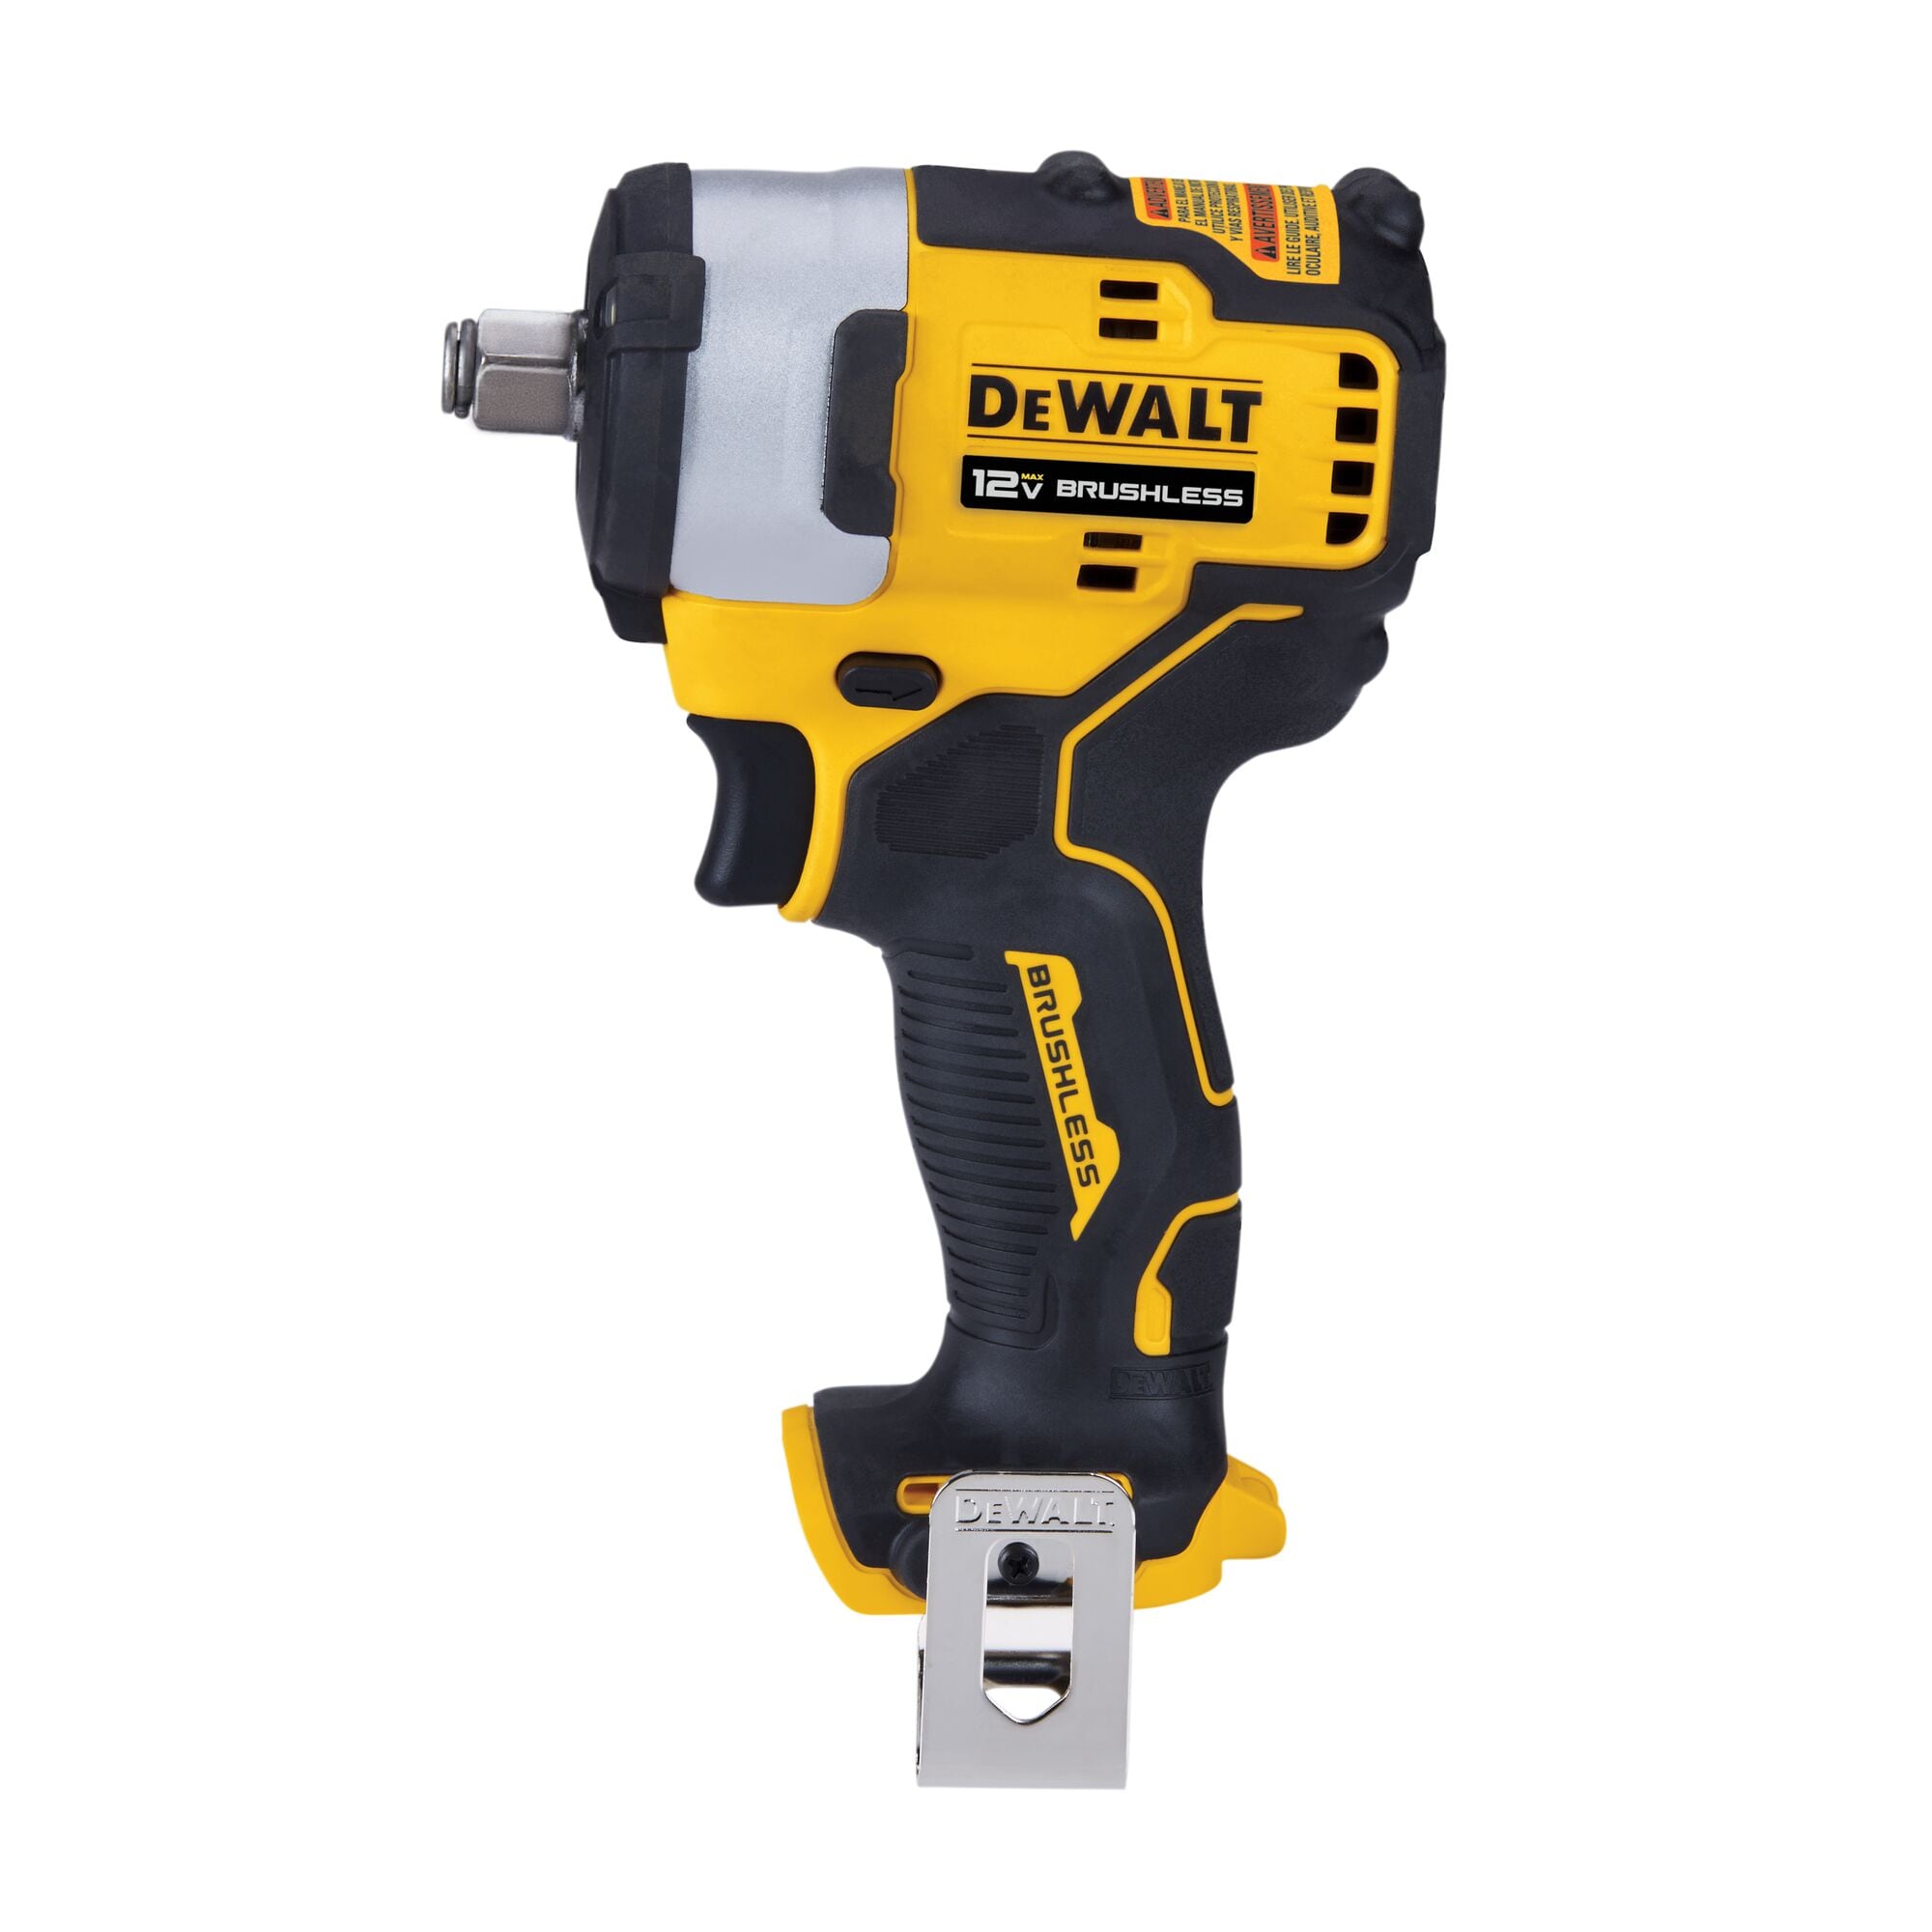 DEWALT XTREME 12-volt Max Variable Speed Brushless 1/2-in Drive